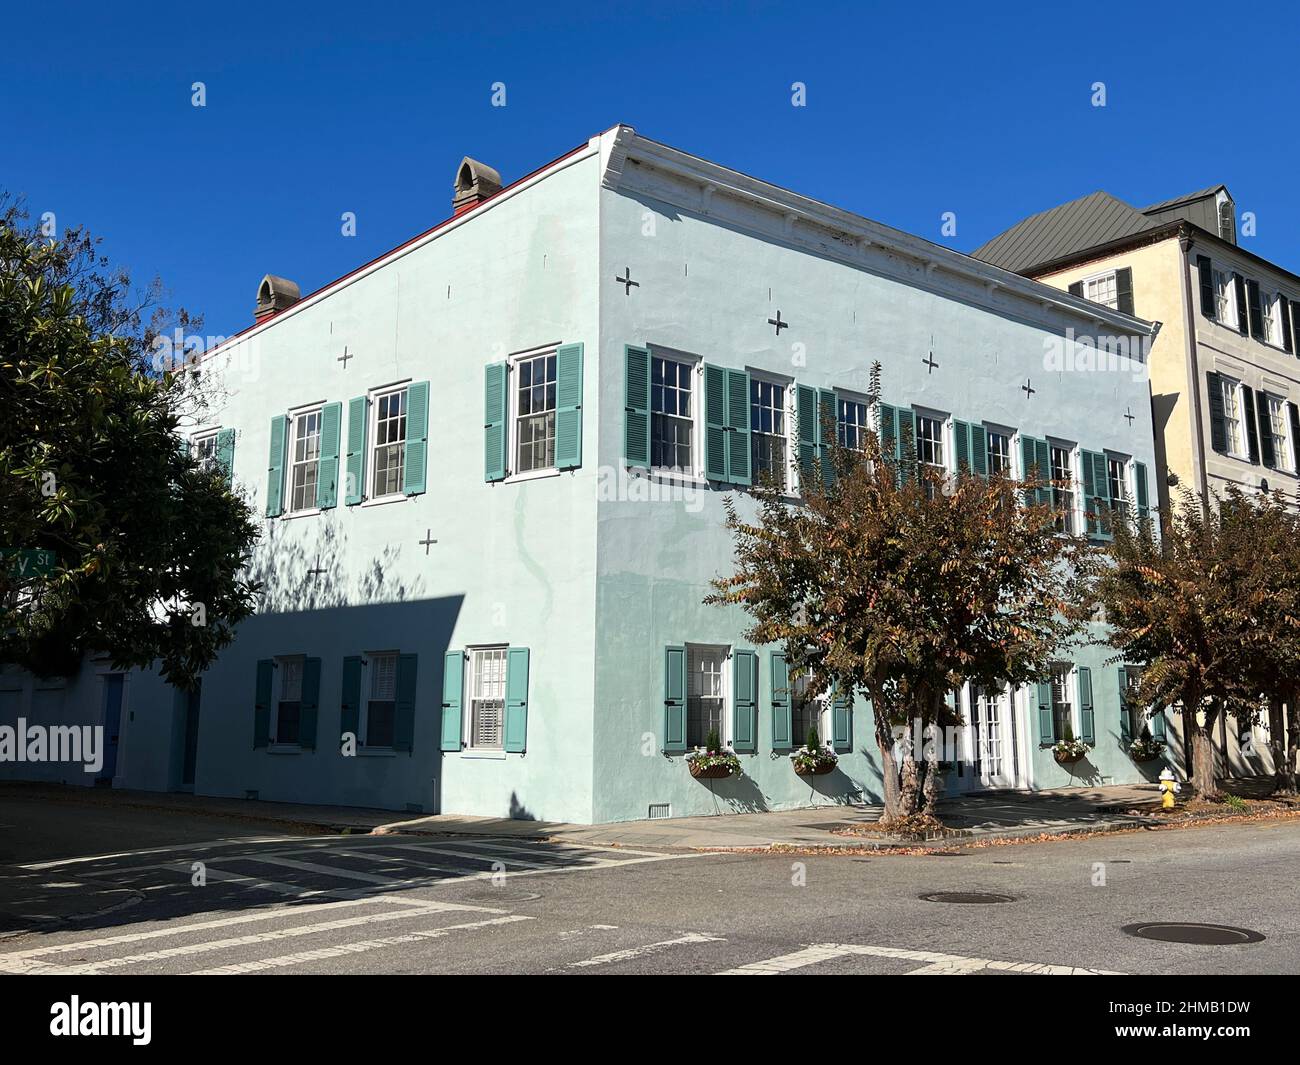 Architecture seen in the historic district of Charleston, South Carolina, a southern United States luxury travel destination. Stock Photo